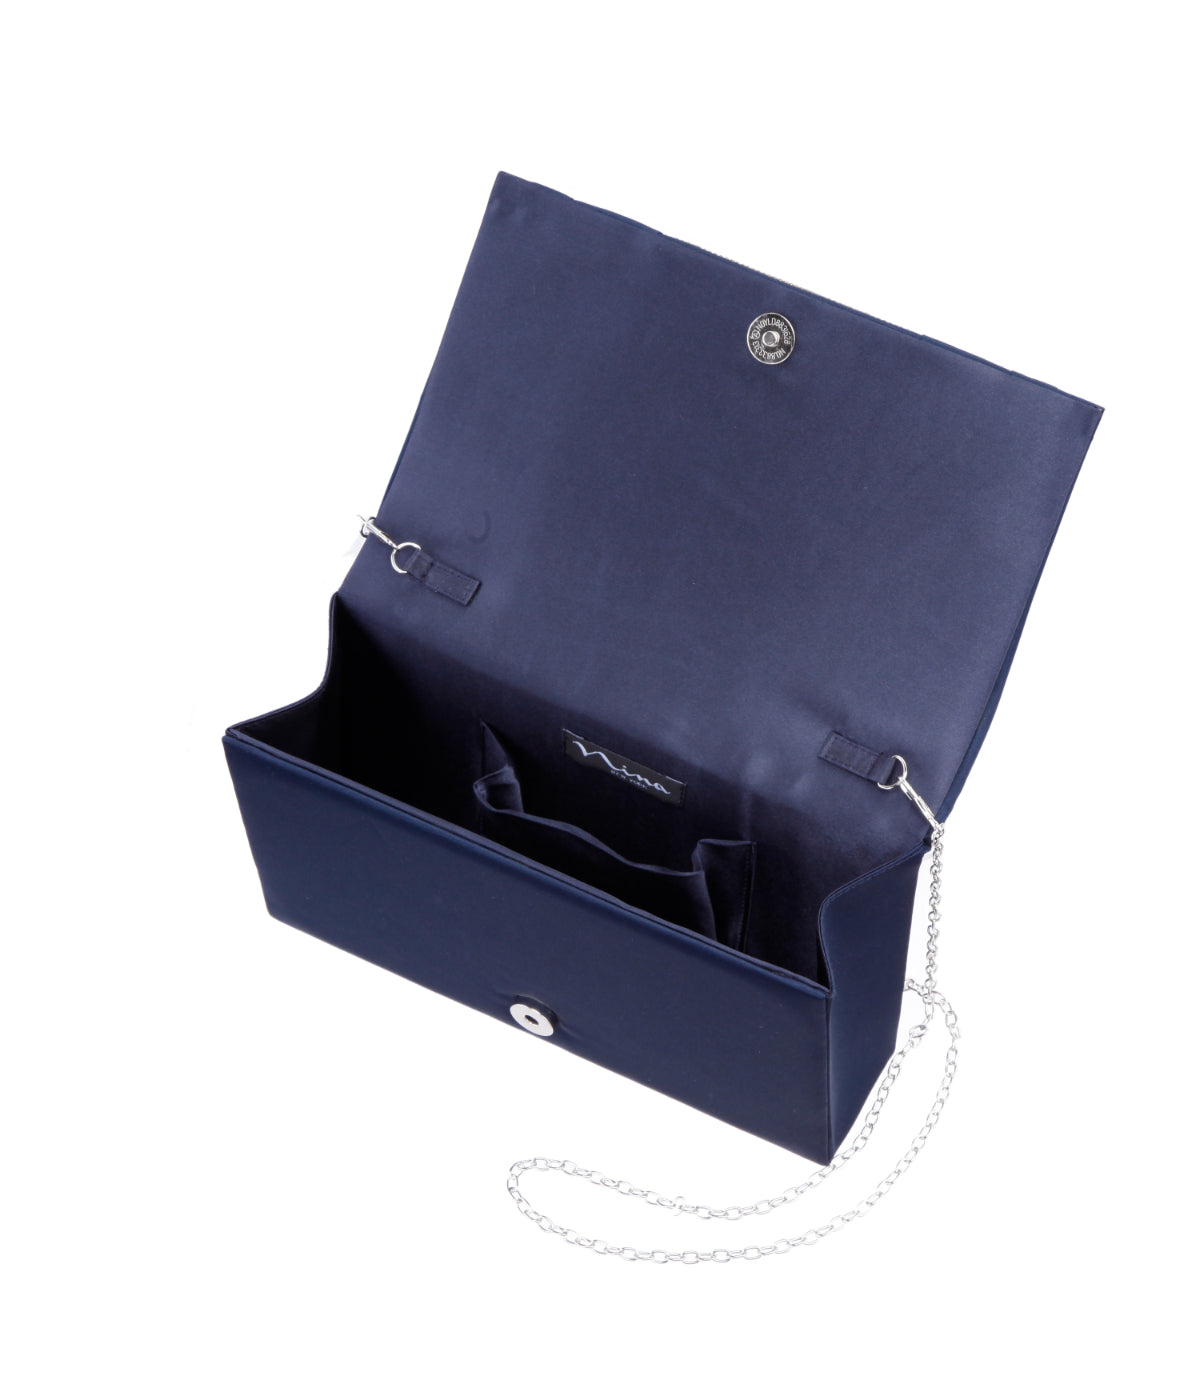 Elleme Pleated Flap Clutch With Crystal Inset Navy